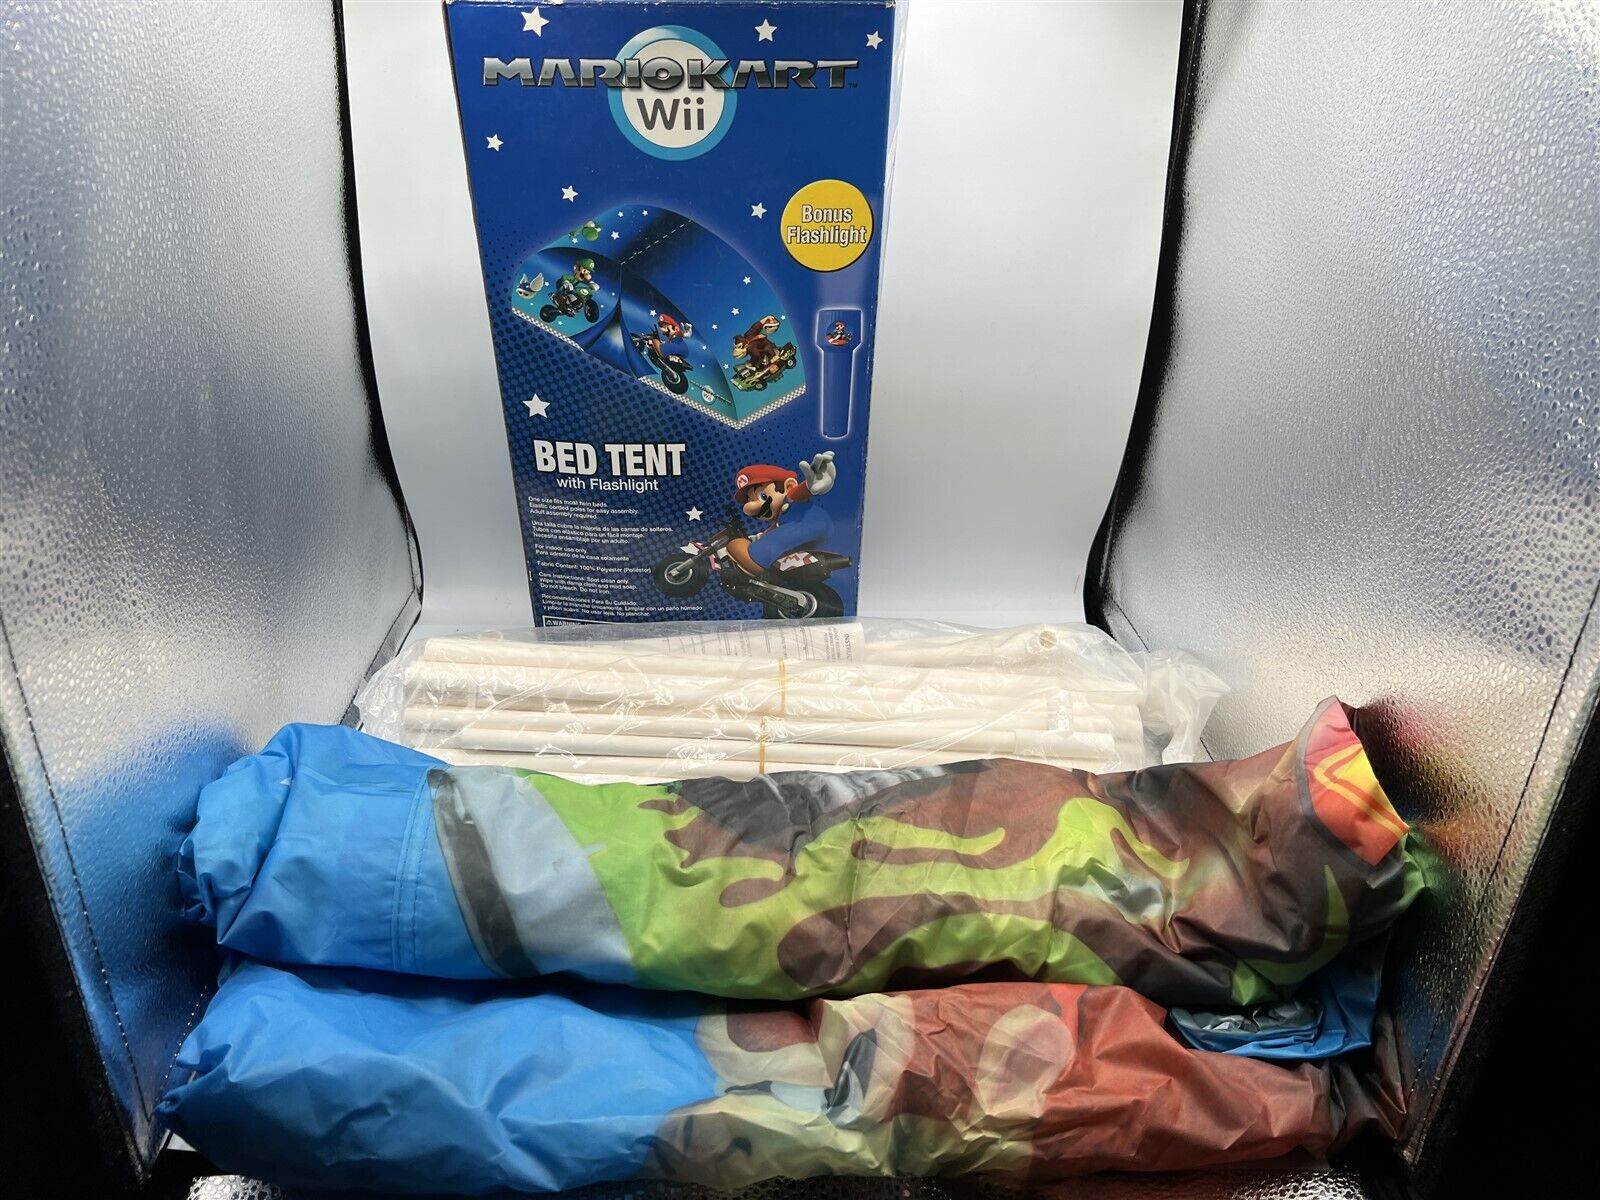 RARE 2011 OFFICIAL NINTENDO MARIO KART TWIN BED TENT "NEVER USED"